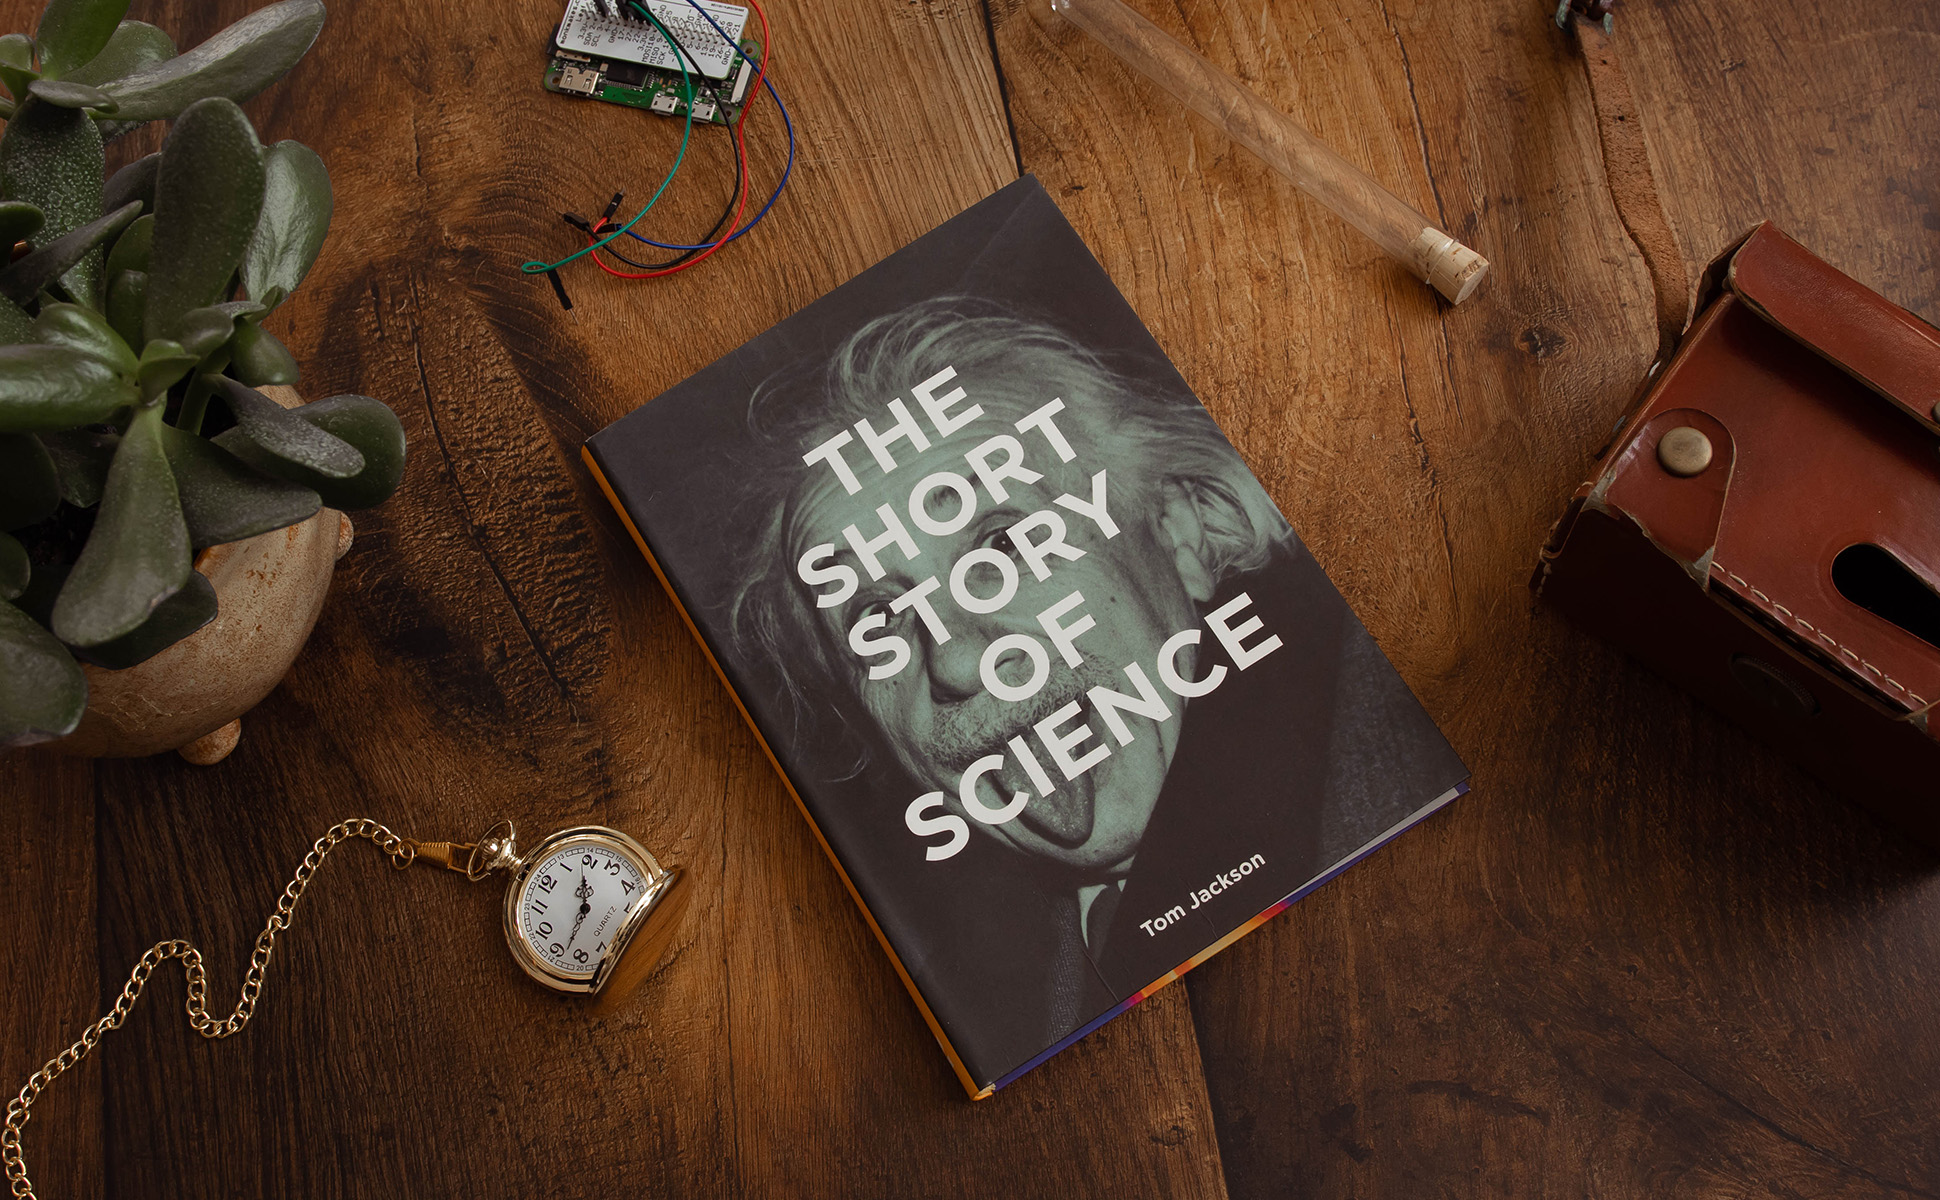 The Short Story of Science